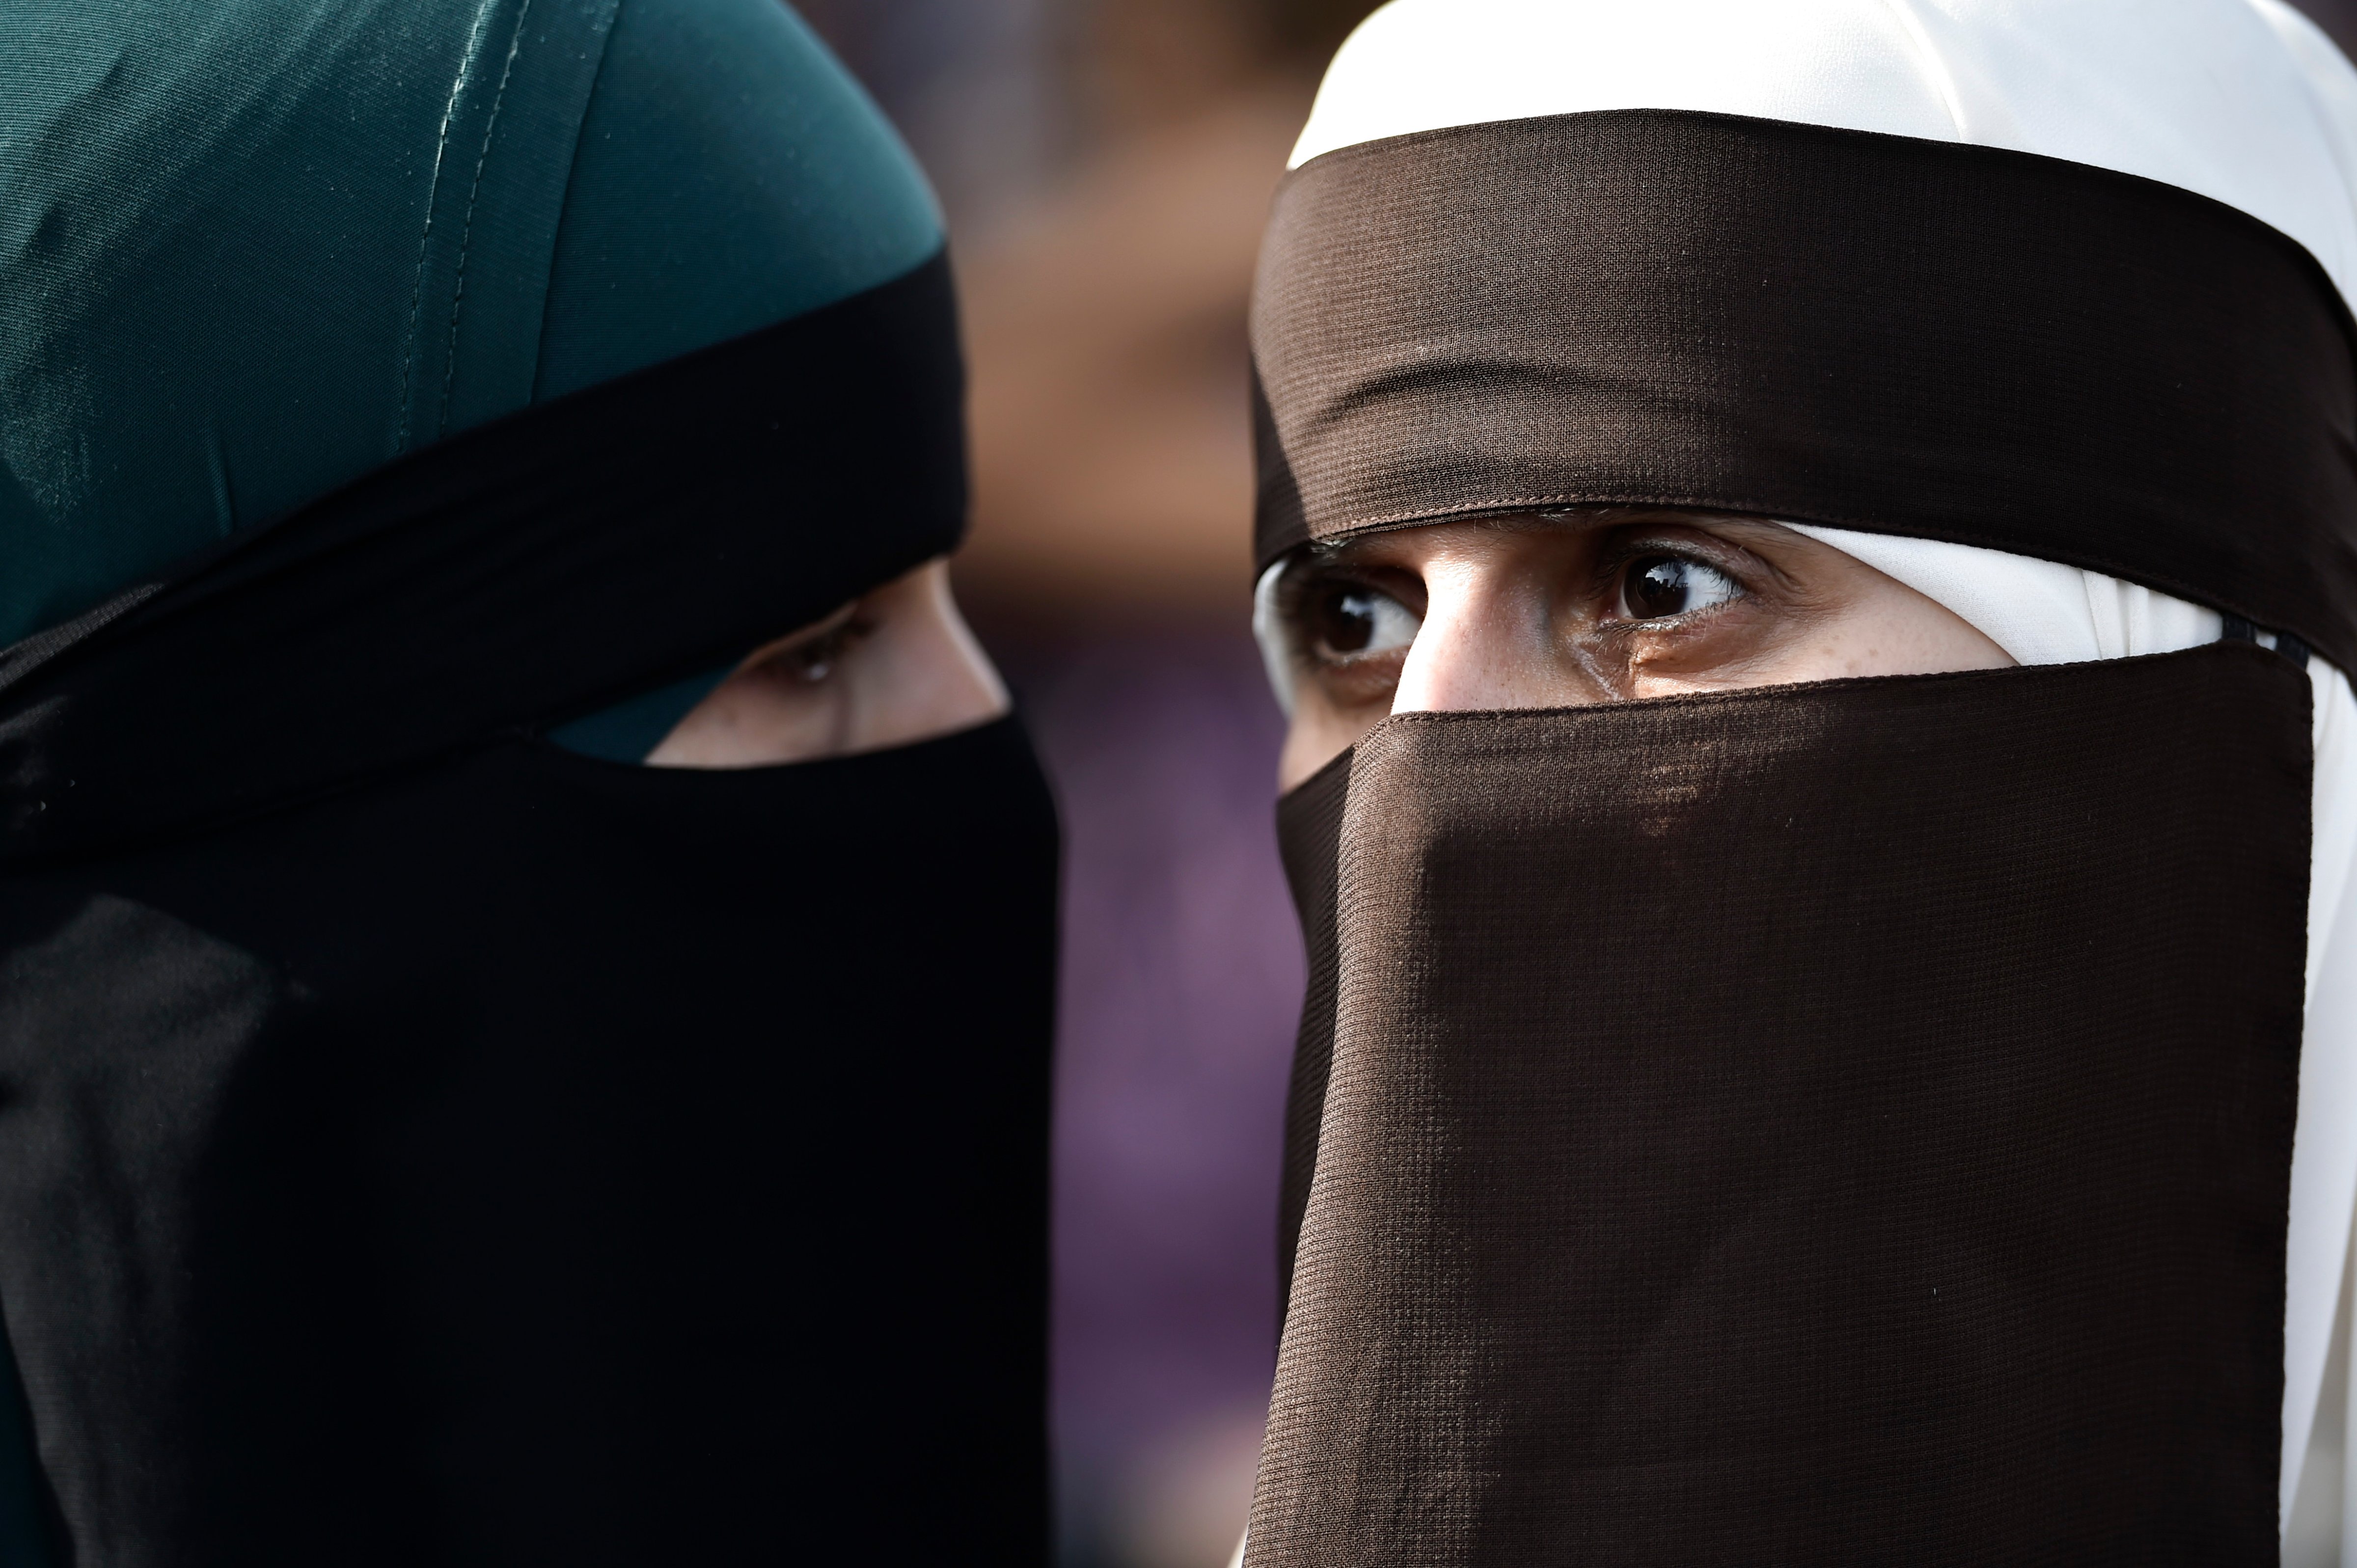 Women wearing niqab to veil their faces take part in a demonstration on August 1, 2018, the first day of the implementation of the Danish face veil ban, in Copenhagen, Denmark. (MADS CLAUS RASMUSSEN—AFP/Getty Images)